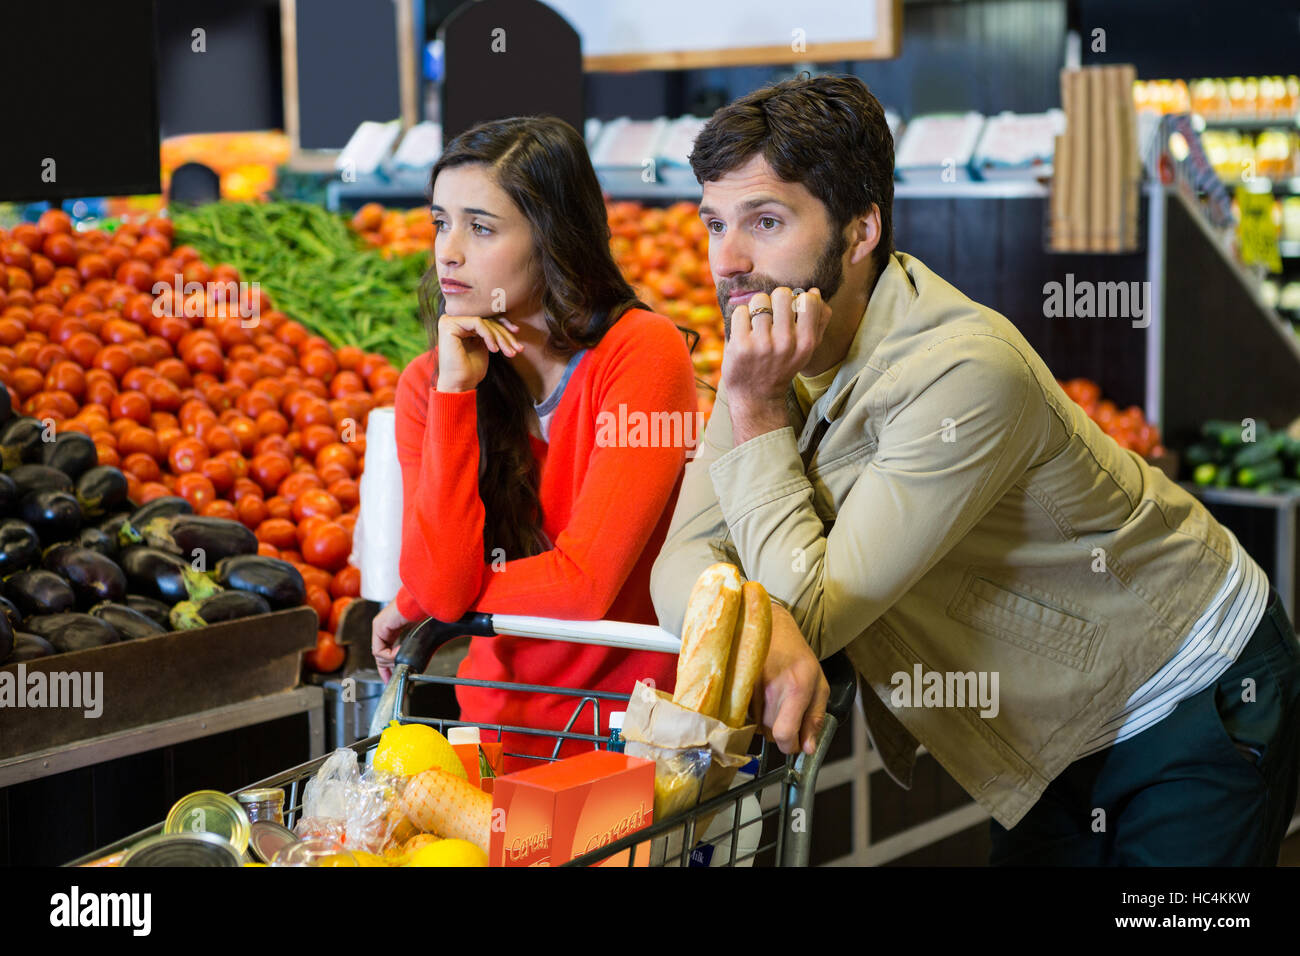 Bored couple with shopping trolley in organic section Stock Photo